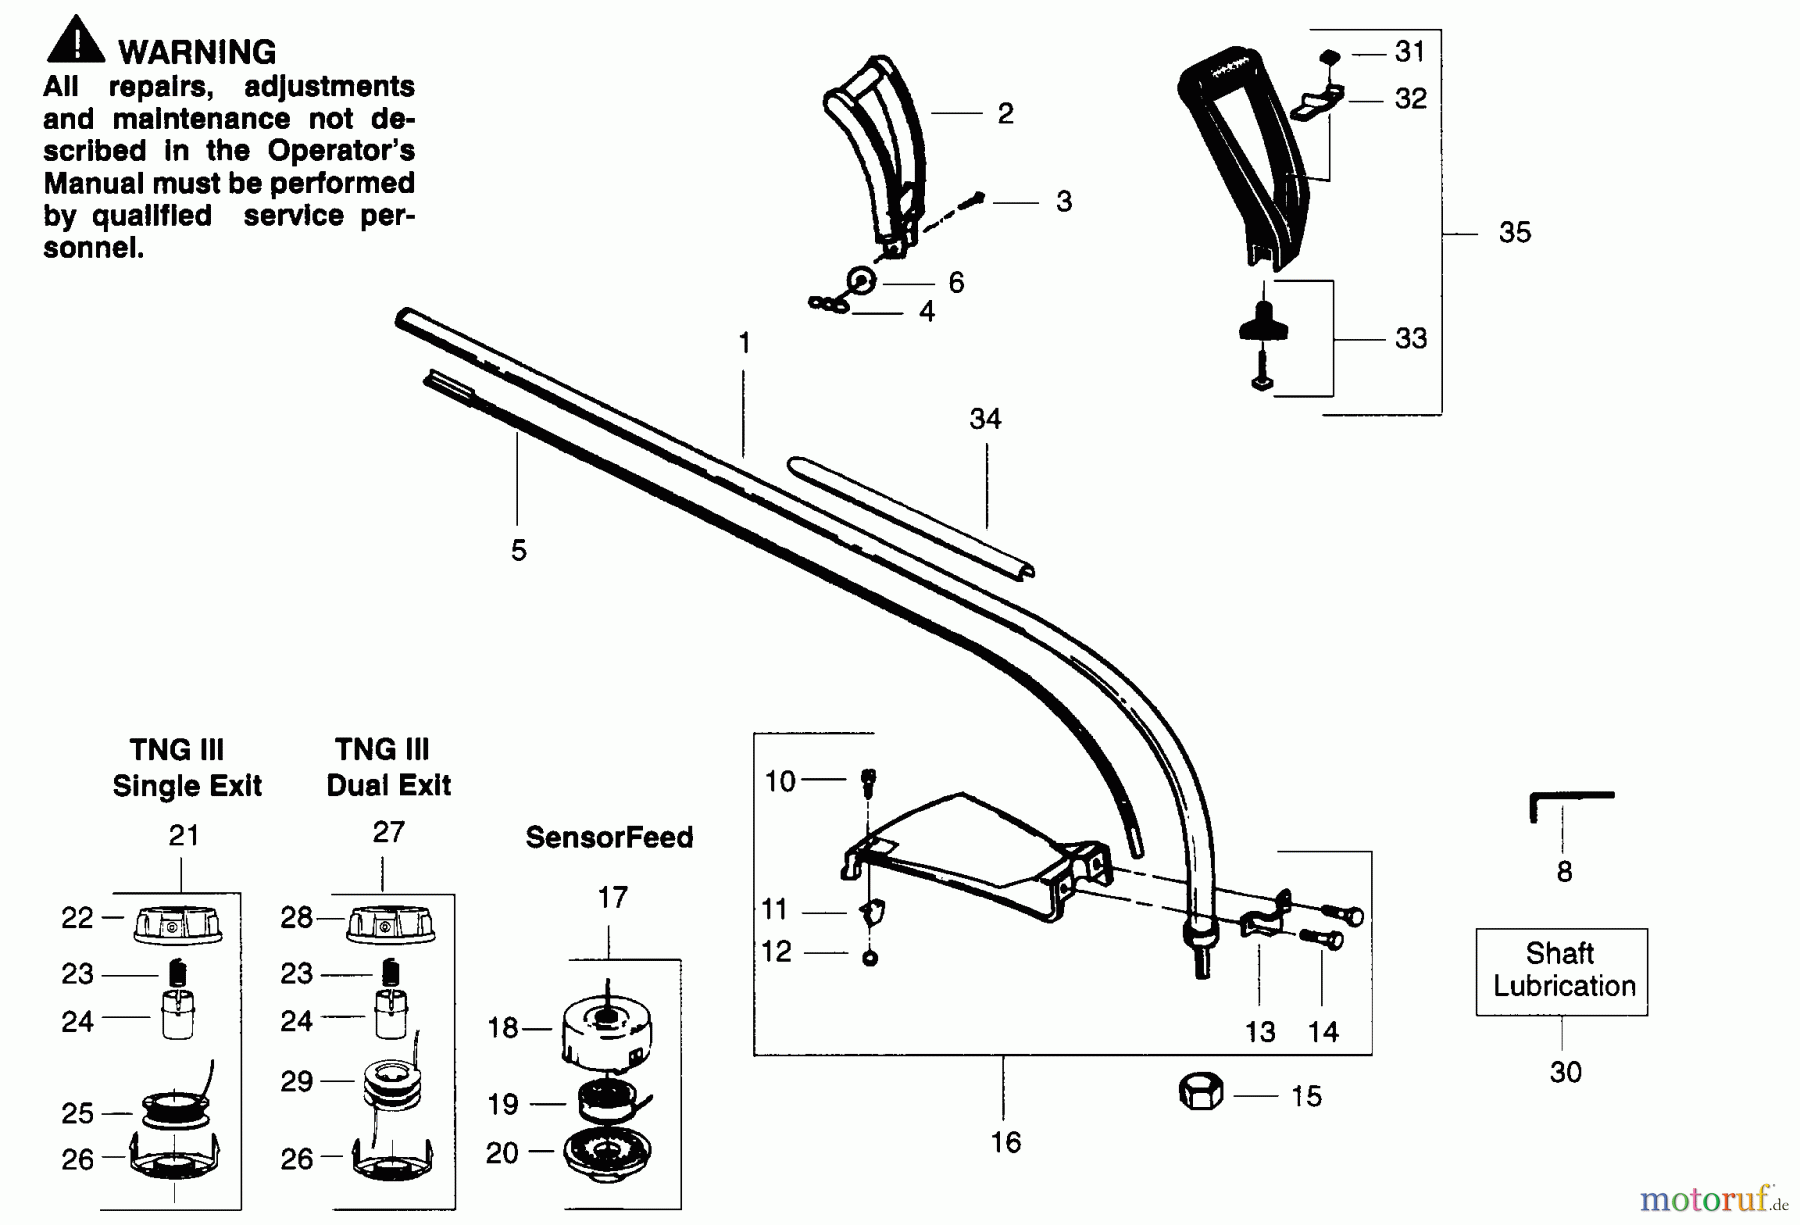  Poulan / Weed Eater Motorsensen, Trimmer GTI16 - Weed Eater String Trimmer DRIVE SHAFT & CUTTING HEAD